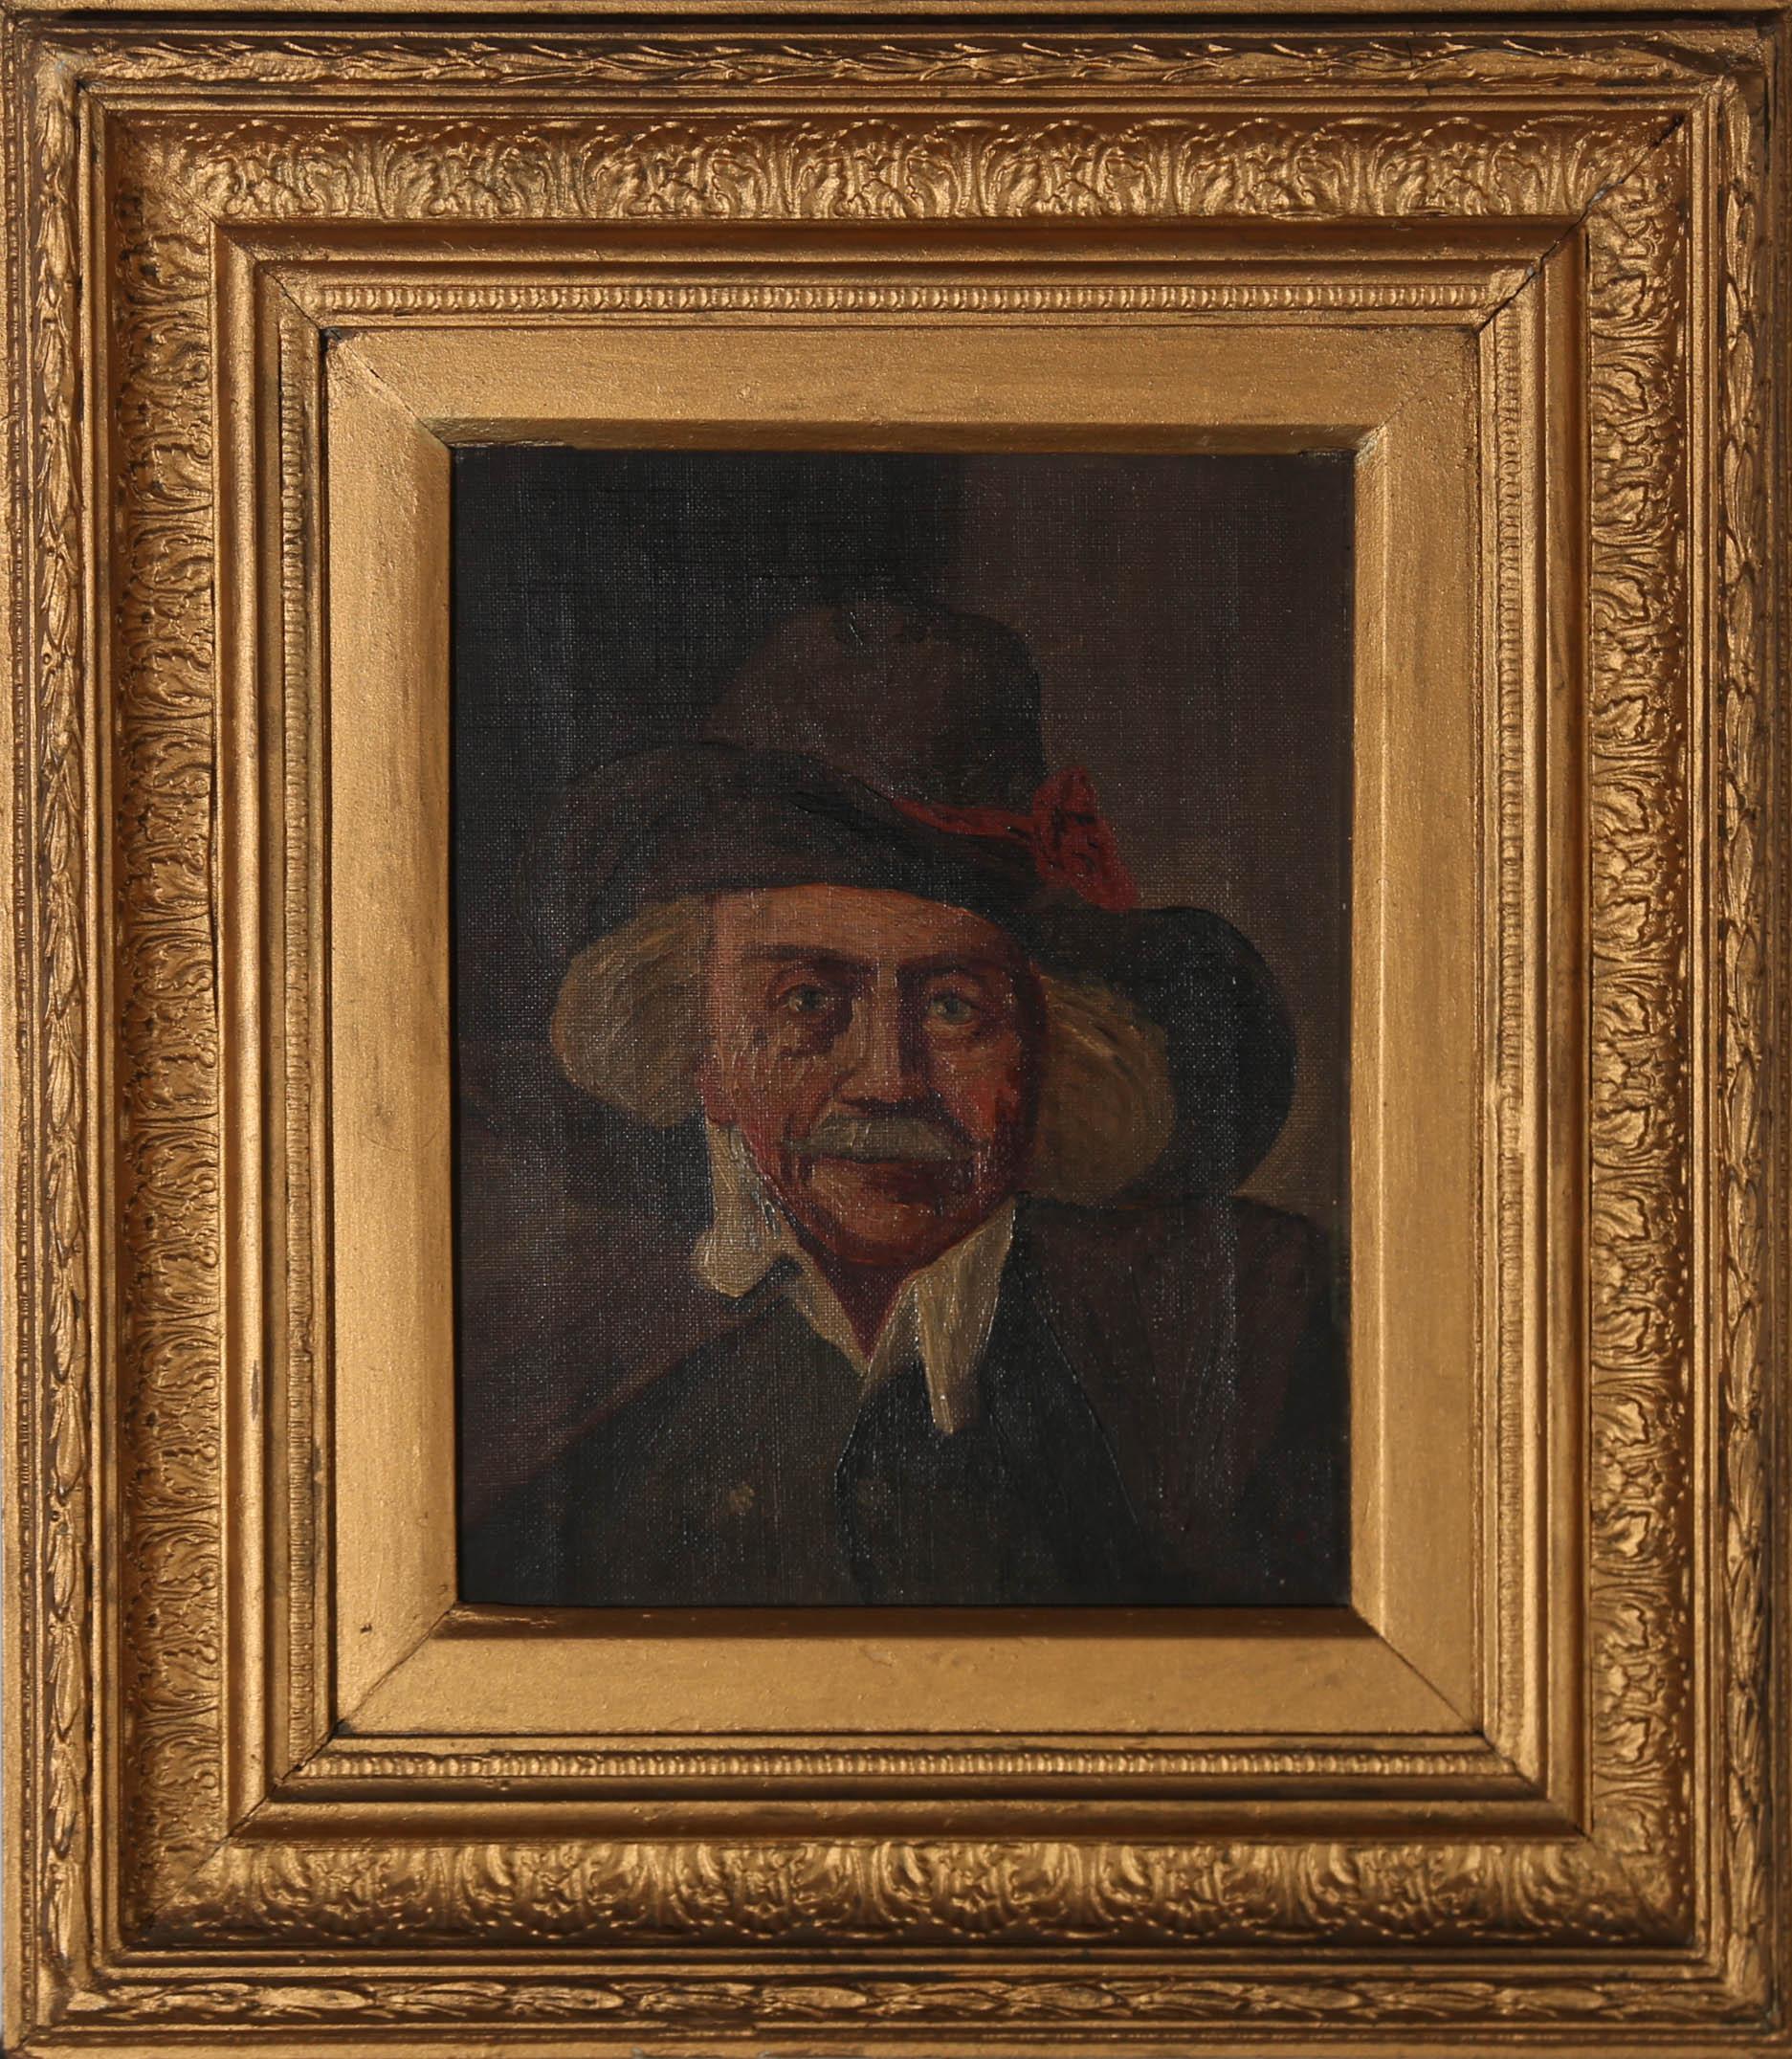 A fine 19th Century portrait of a smiling man with a handsome mustache in a fetching hat. The artist has signed somewhat illegibly and dated to the lower right corner and the painting has been presented in a 19th Century frame with laurel and berry